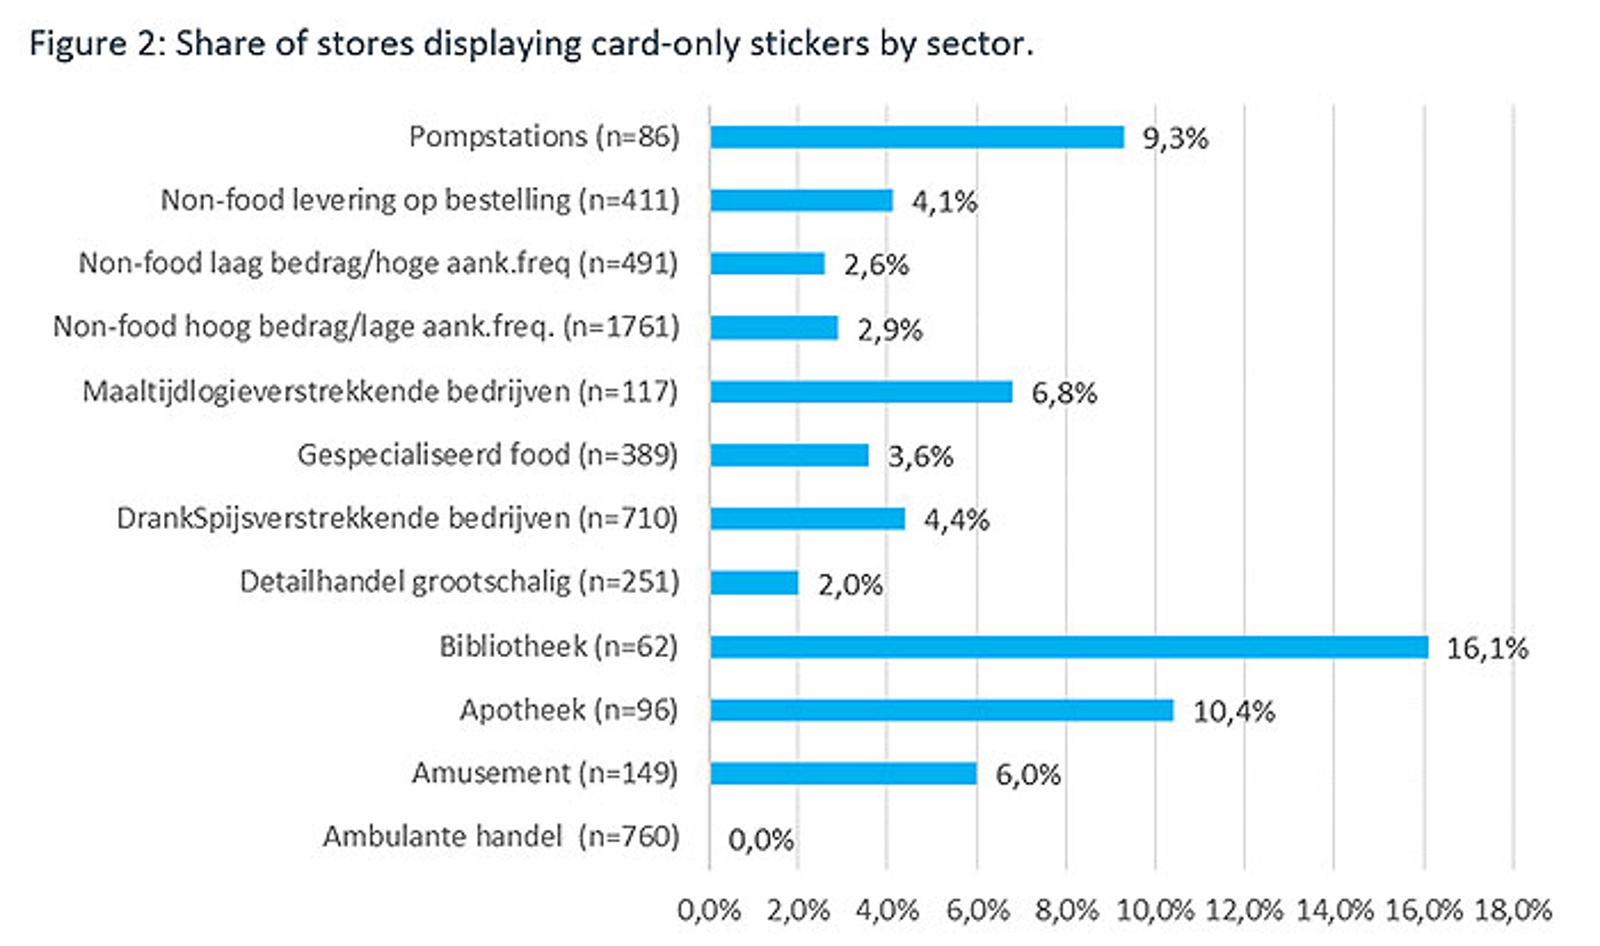 Share of stores displaying card-only stickers by sector